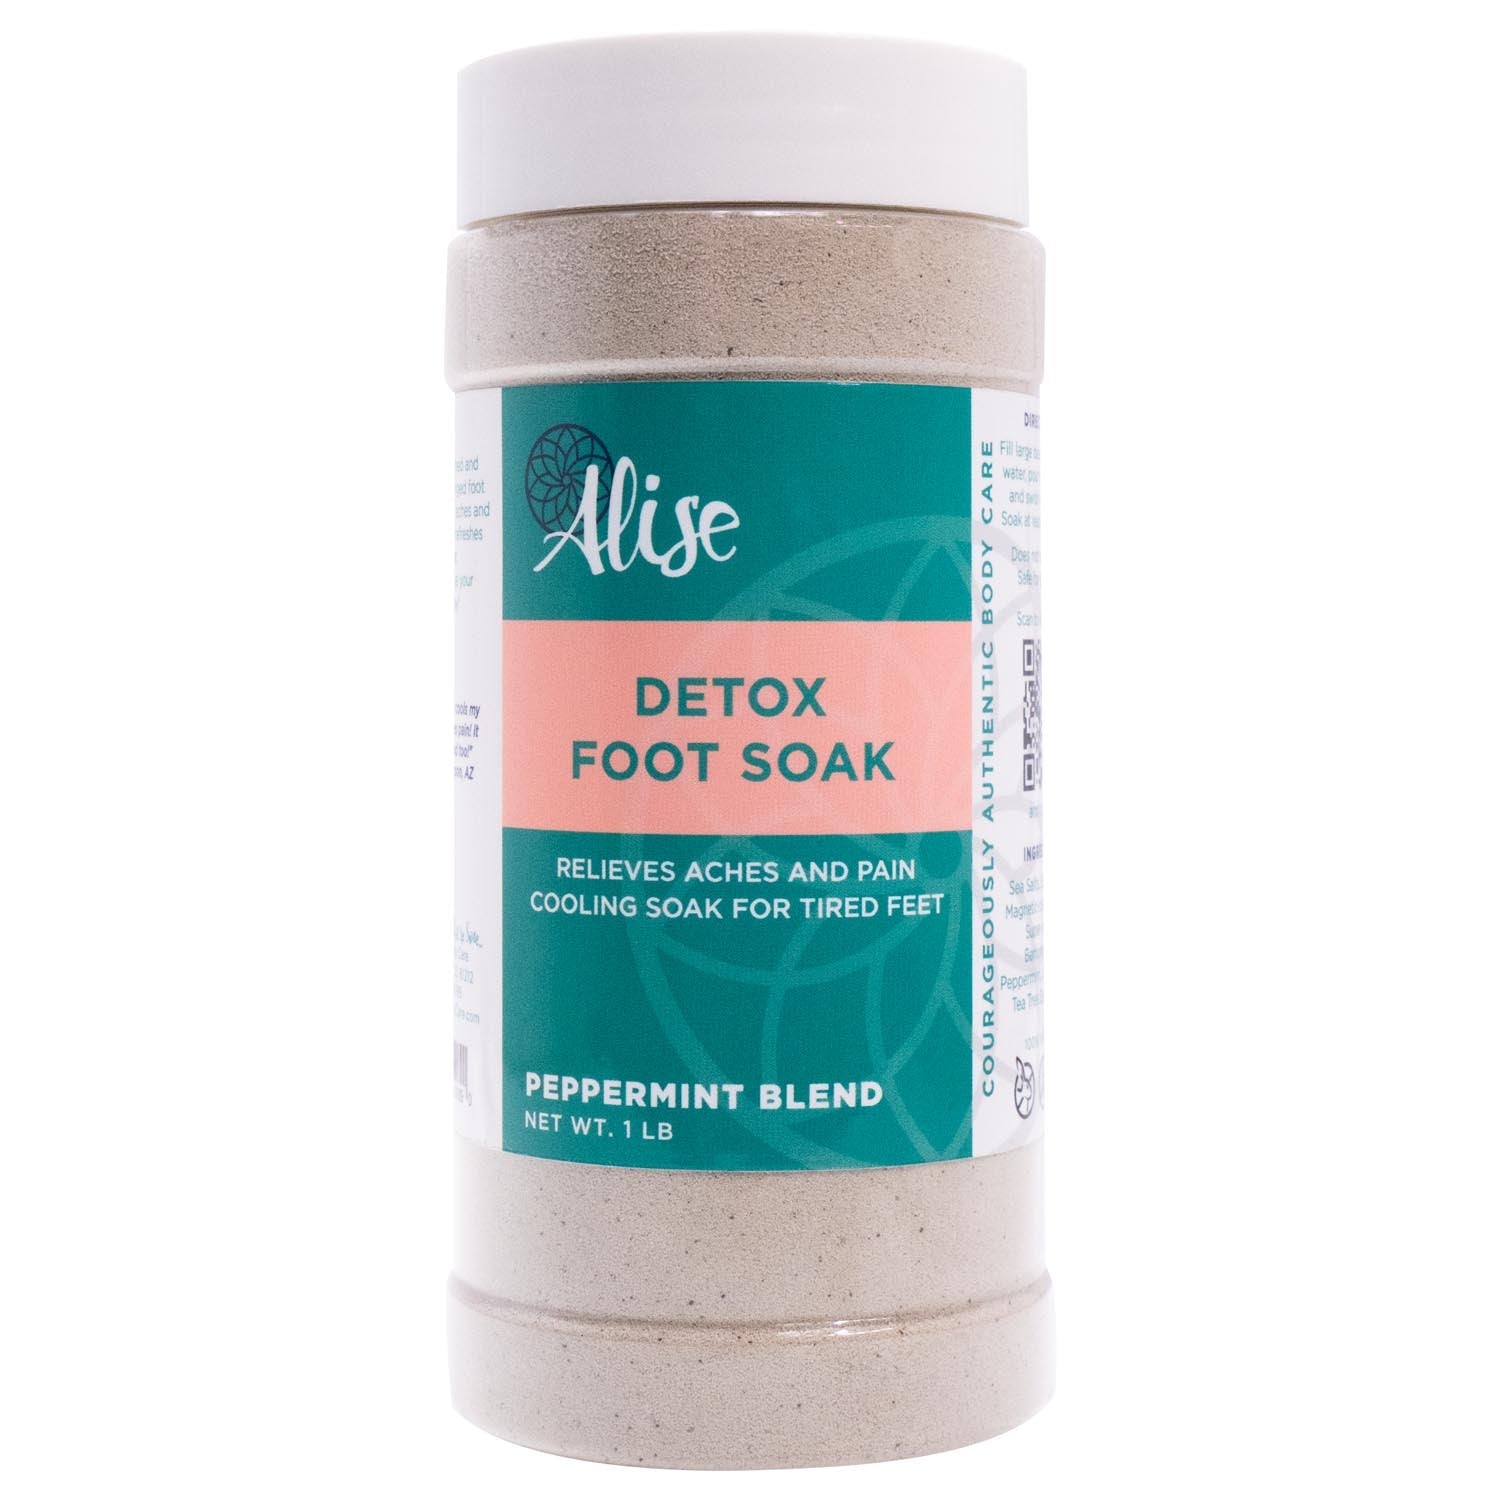 Detox Foot Soak Peppermint Blend 1lb handcrafted by Alise Body Care